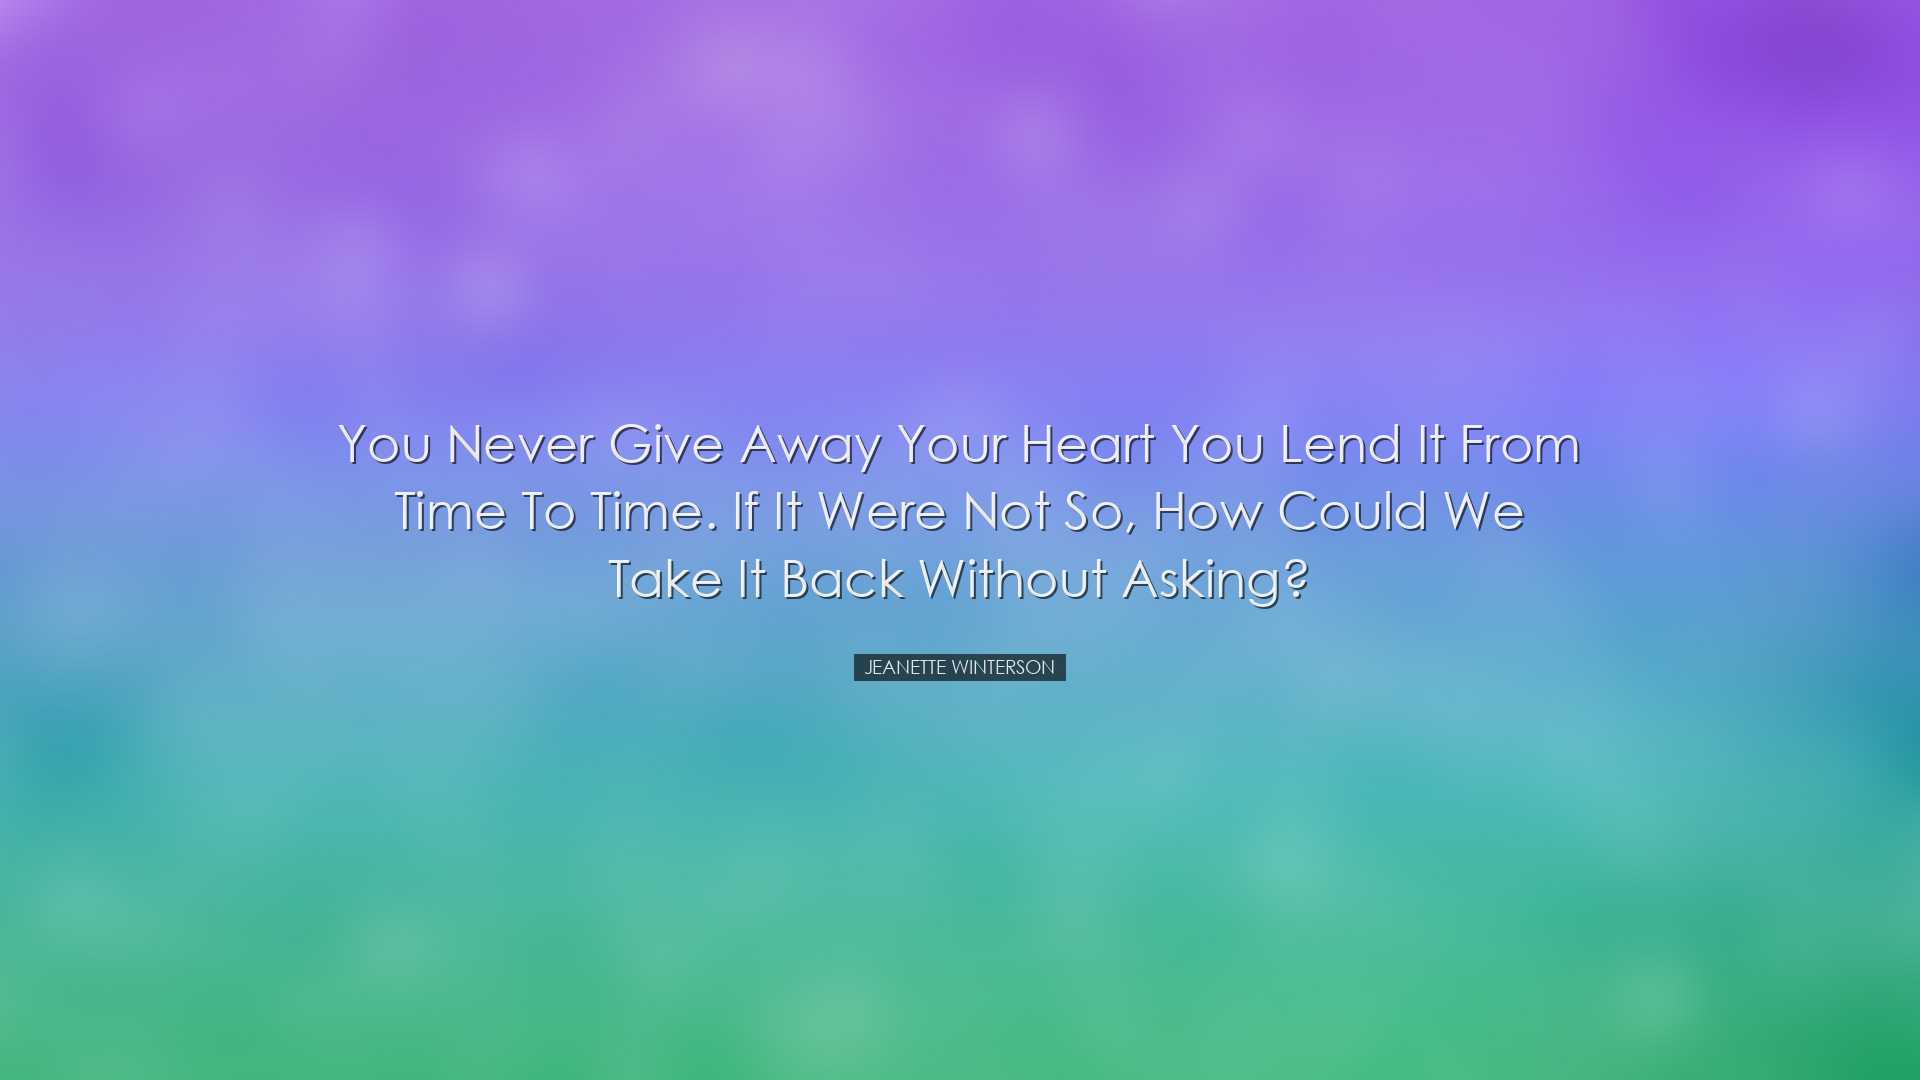 You never give away your heart you lend it from time to time. If i